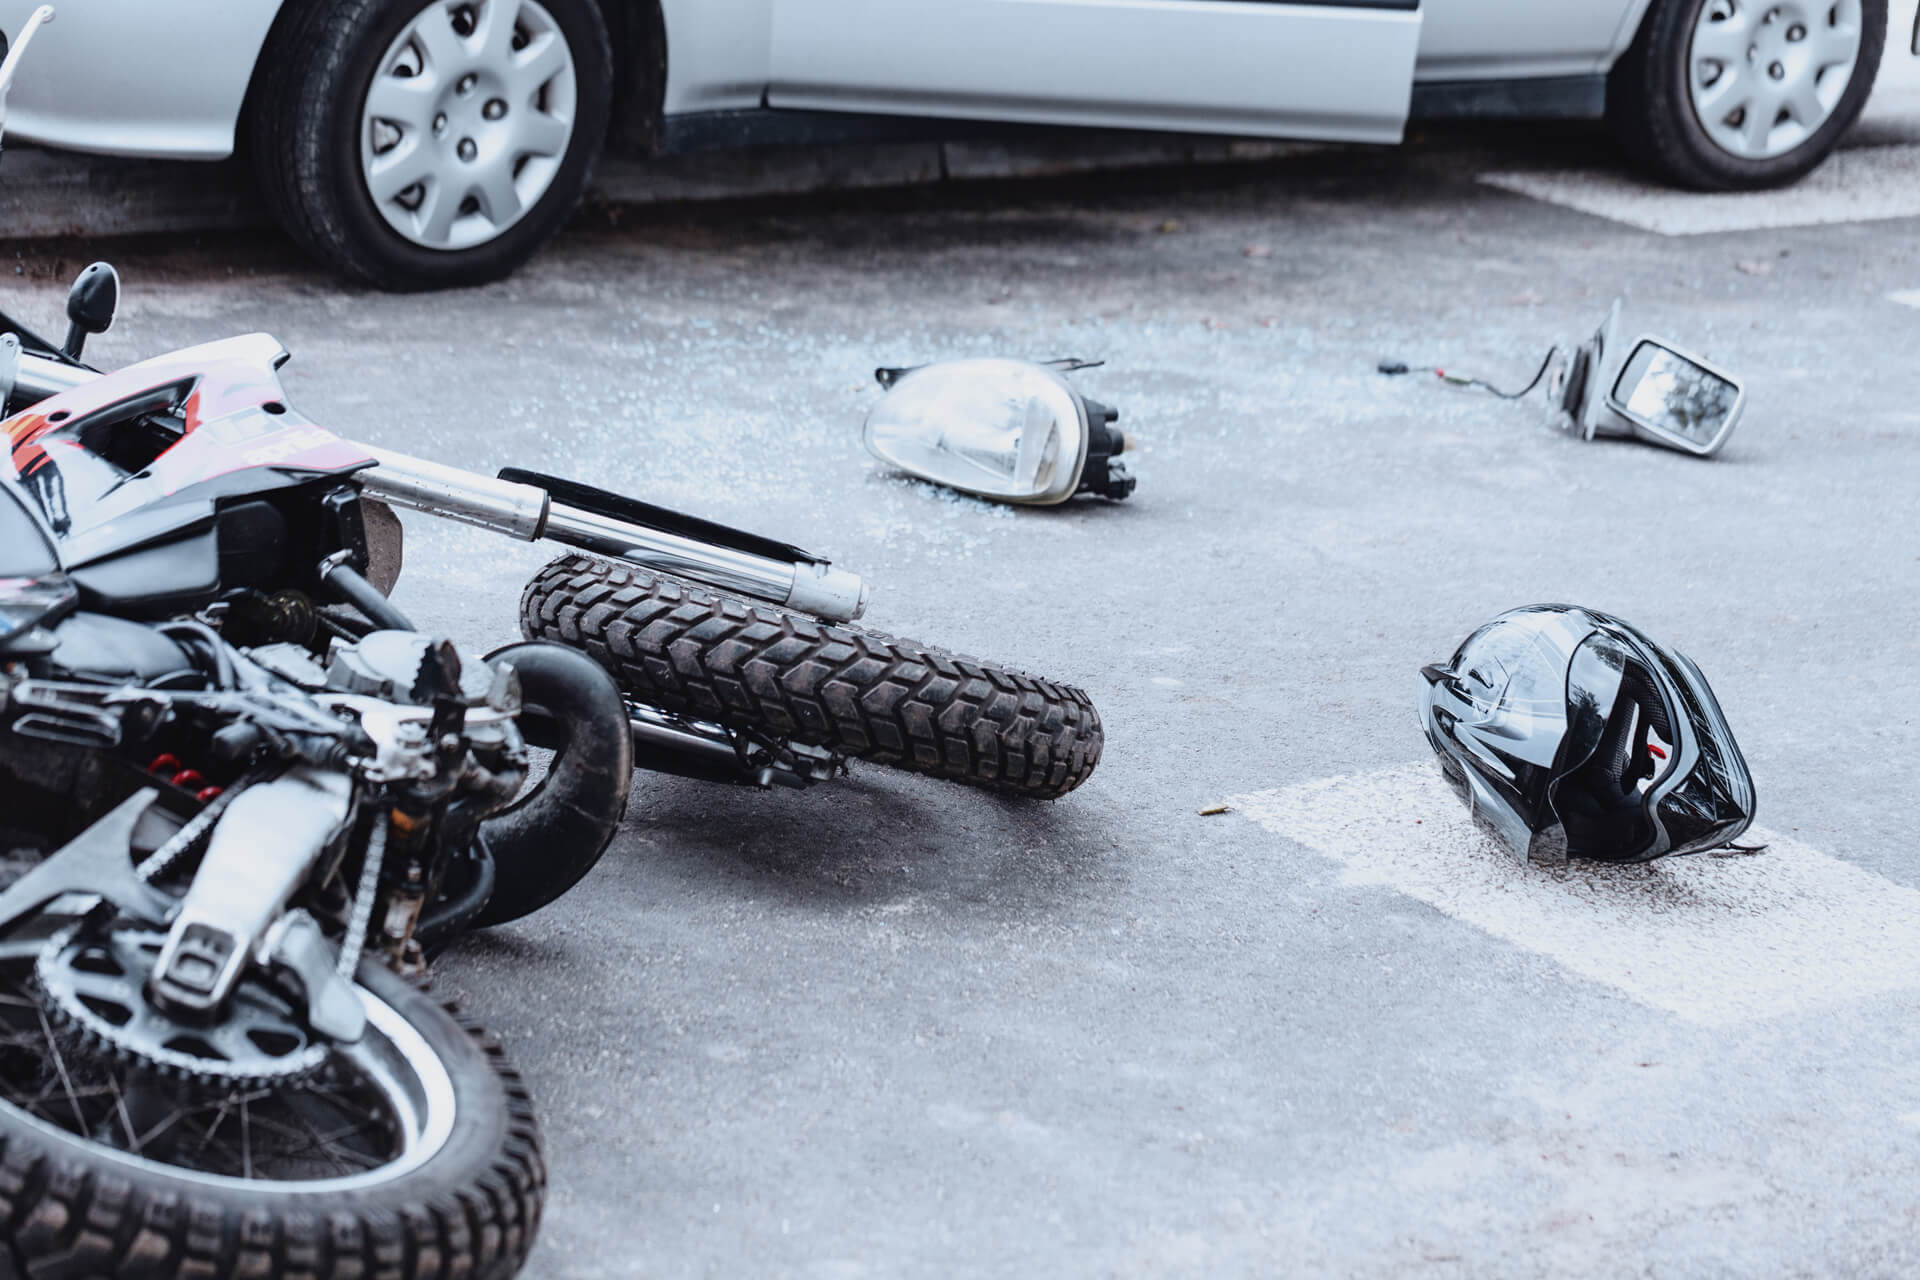 Motorcycle on the ground after an accident